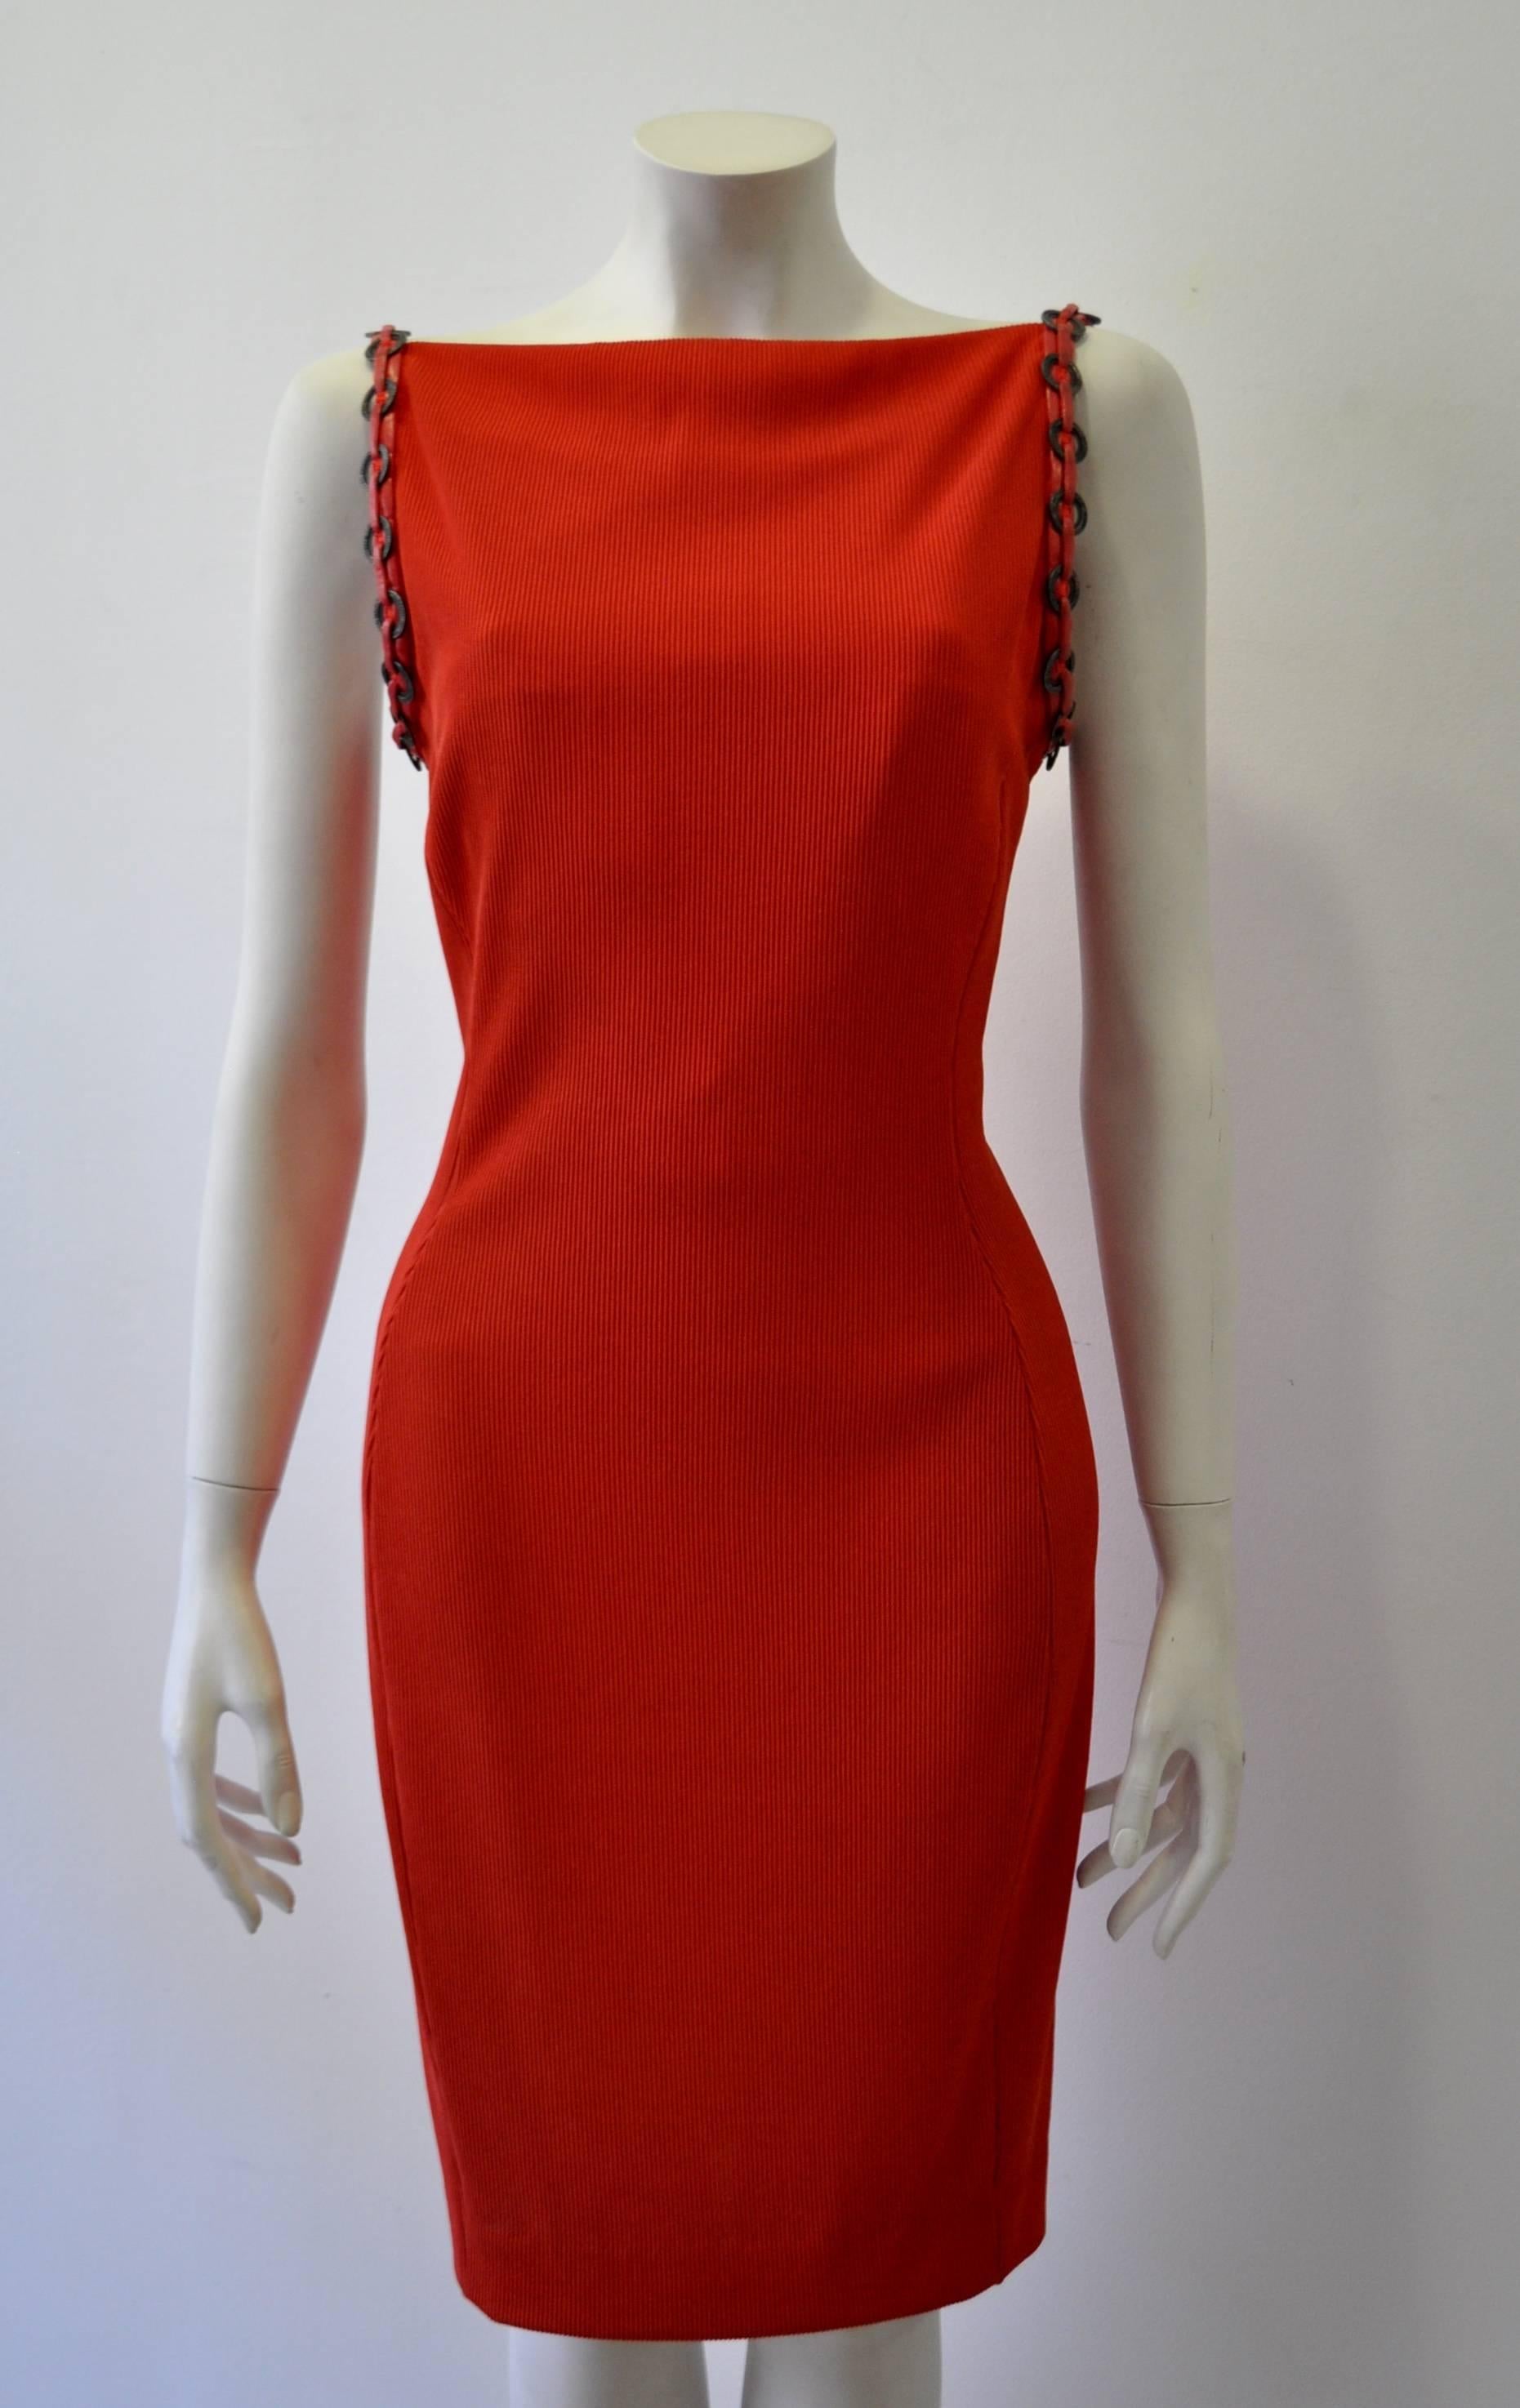 Iconic Gianni Versace Couture Red Siren Bodycon Dress featuring "Meandros" Greek Key Design Links on Leather Trim Straps